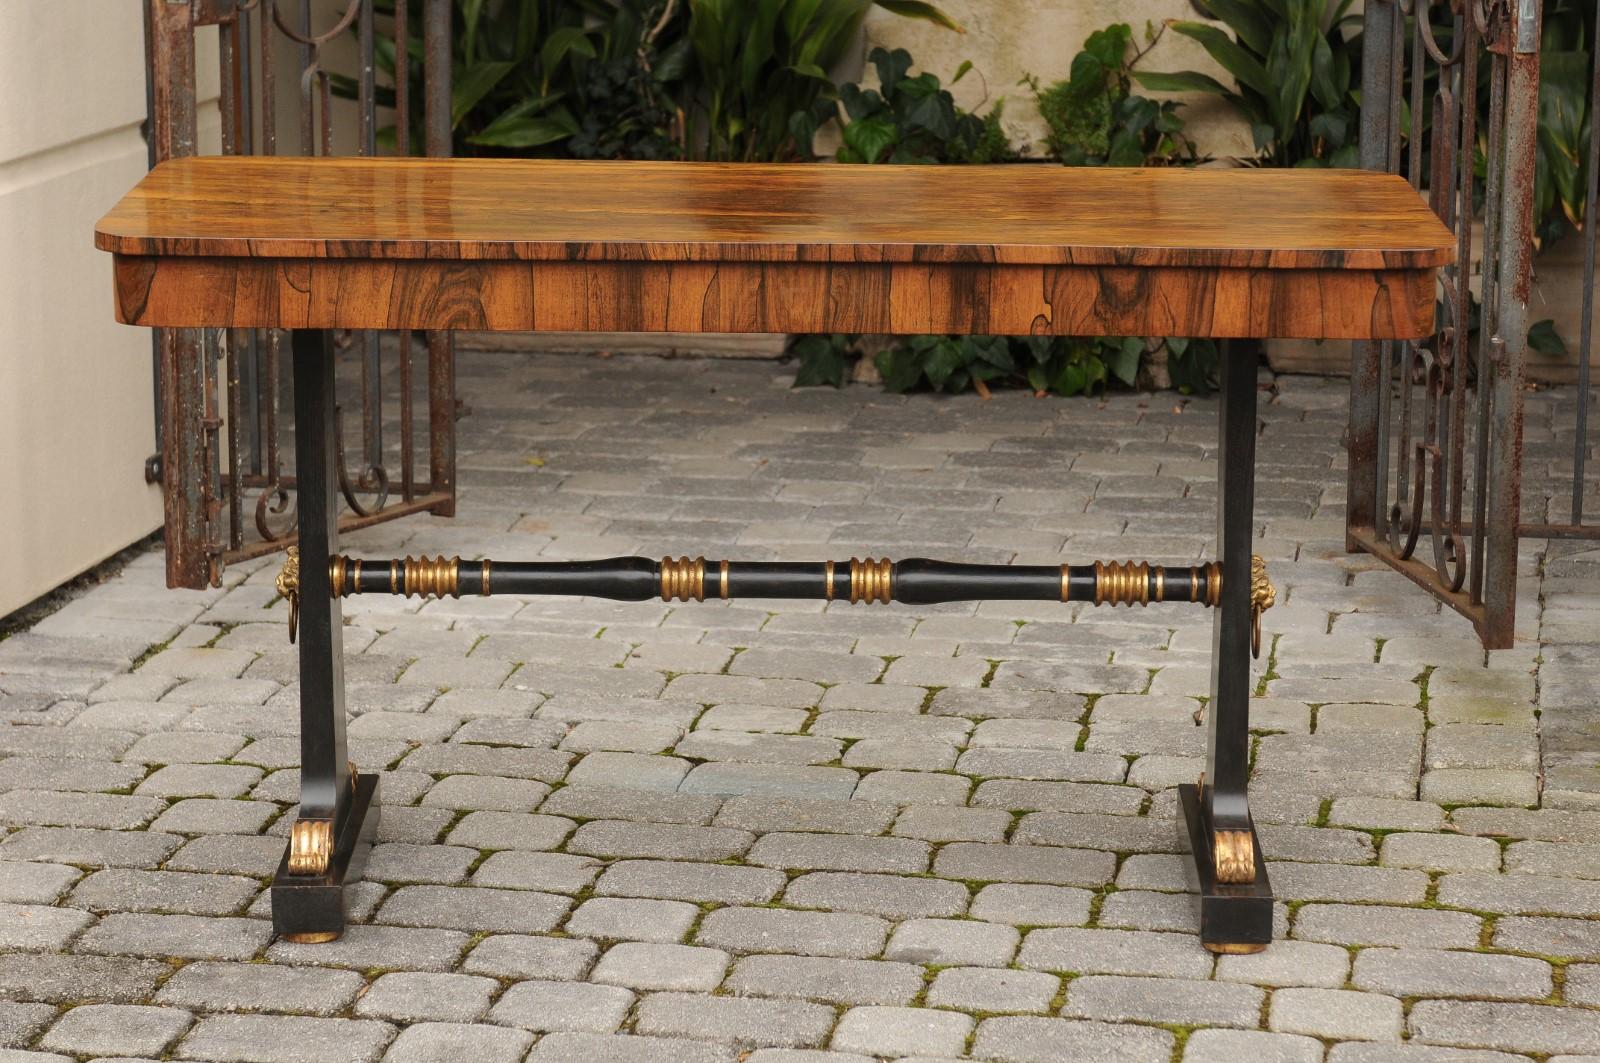 An English Regency rosewood console table from the mid-19th century, with ebonized wood base. Delve into the elegance of the Regency period with this English console table from the mid-19th century, crafted from rosewood with an ebonized wood base.